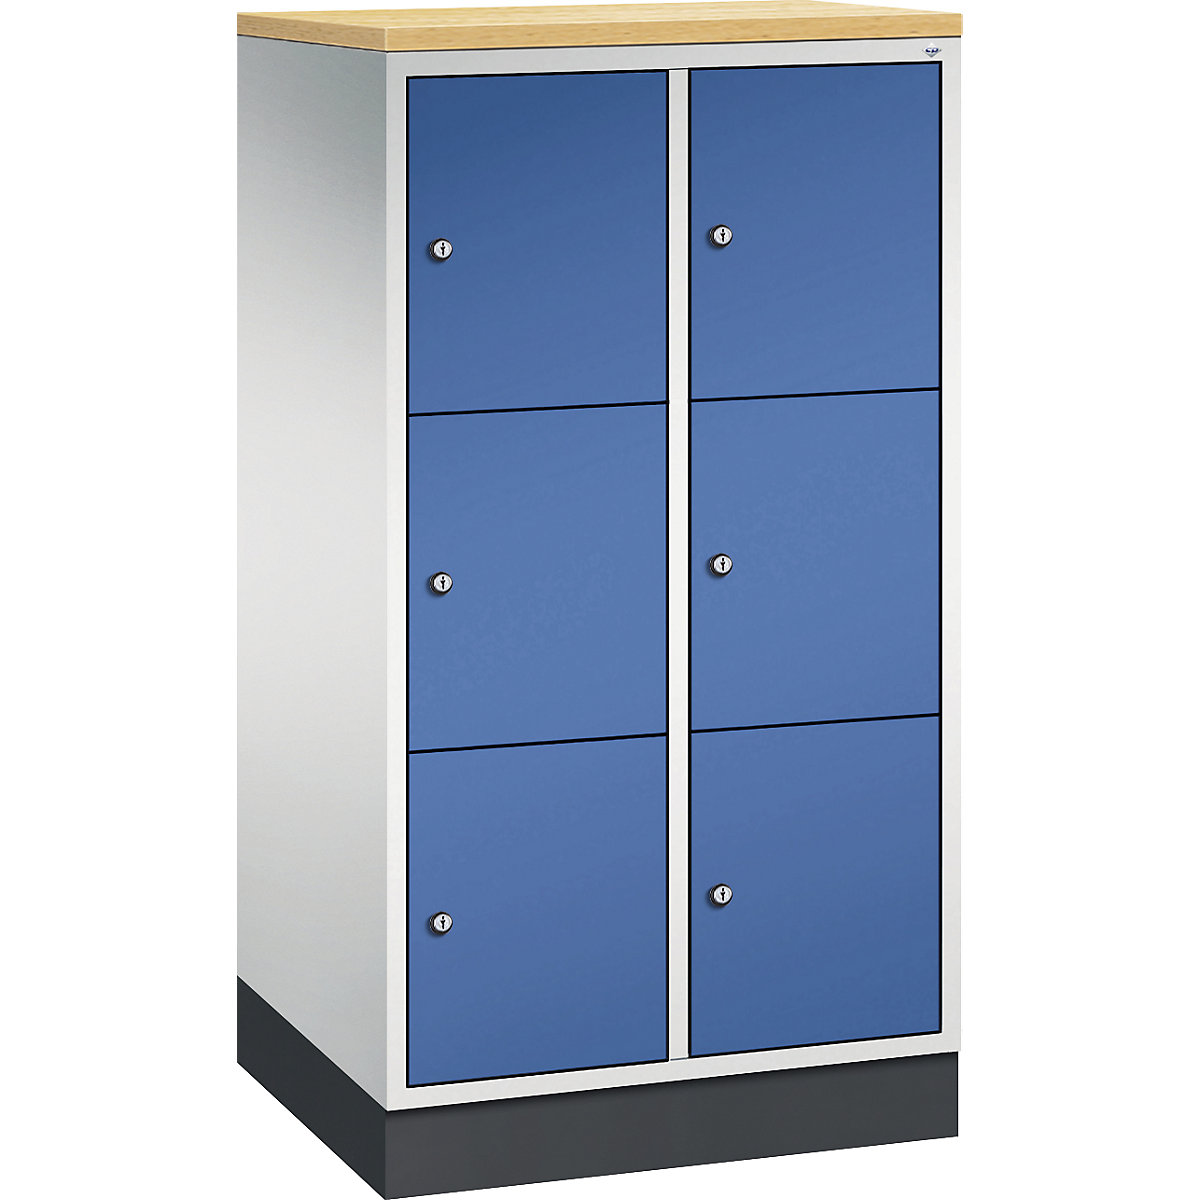 INTRO steel compartment locker, compartment height 345 mm – C+P, WxD 620 x 500 mm, 6 compartments, light grey body, gentian blue doors